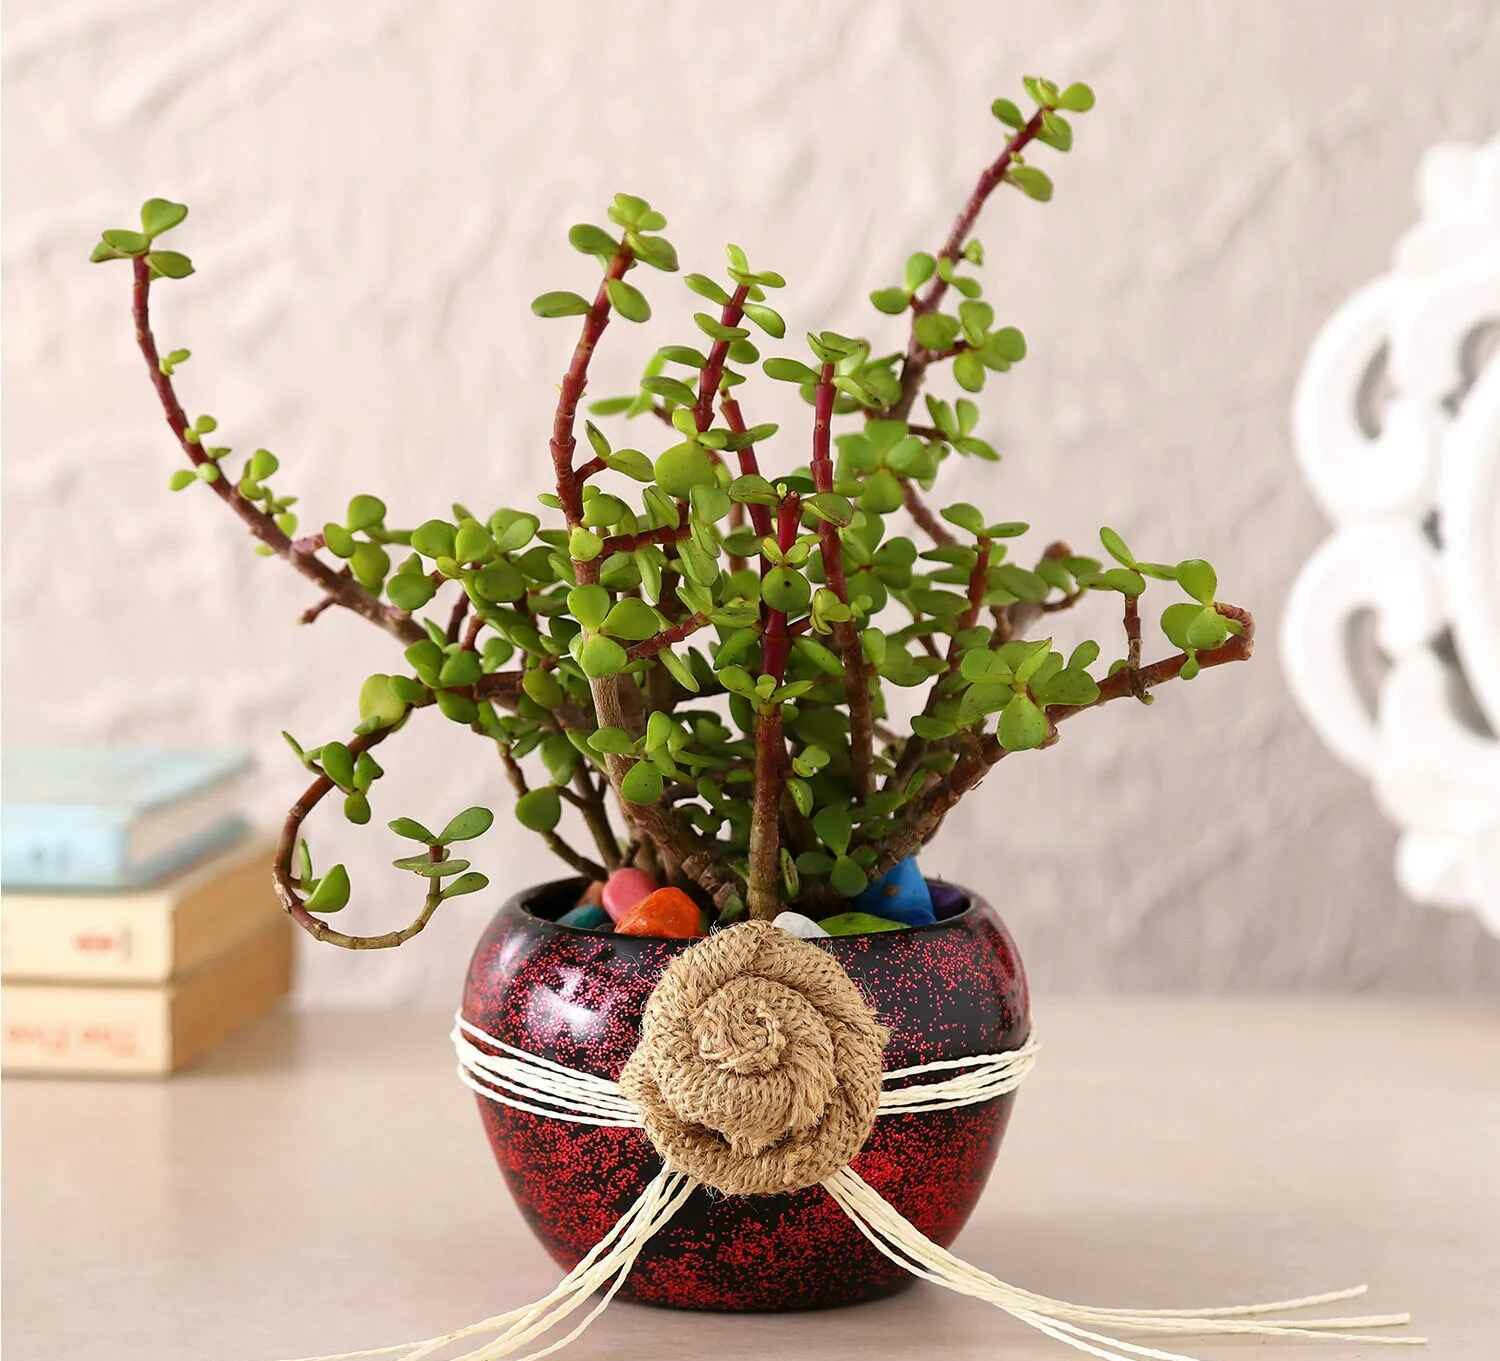 jade plant in a maroon pot on a brown table with books, names of the different types of indoor succulent plants available online